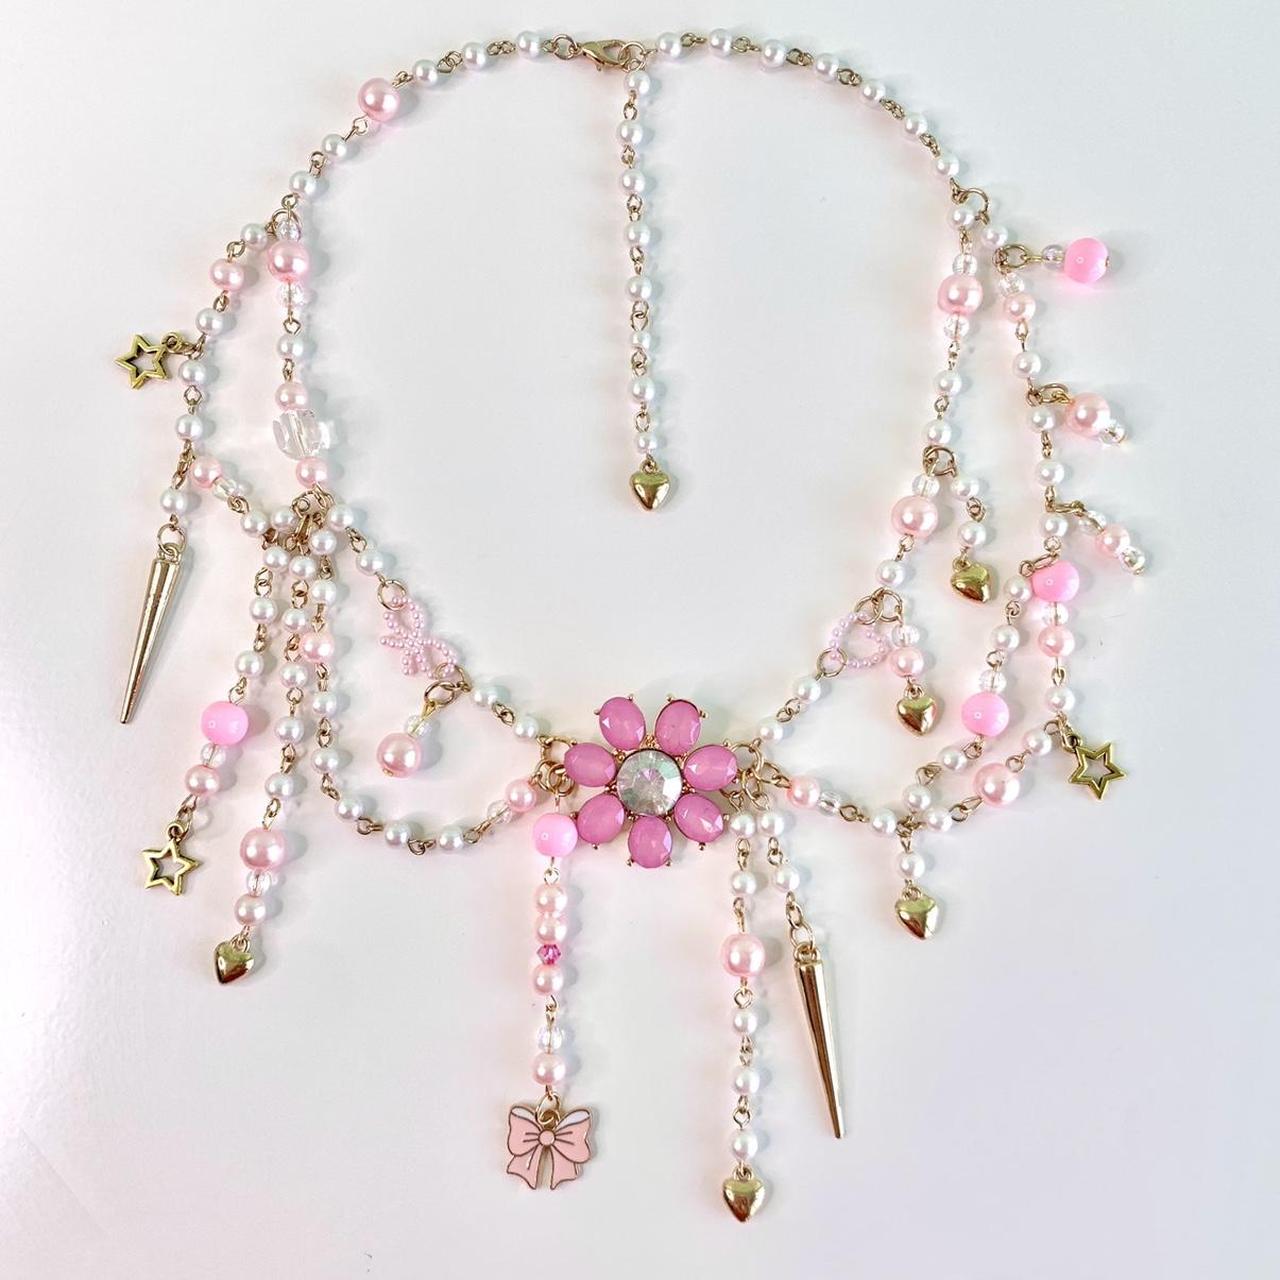 Sugarpill Women's Pink and Gold Jewellery